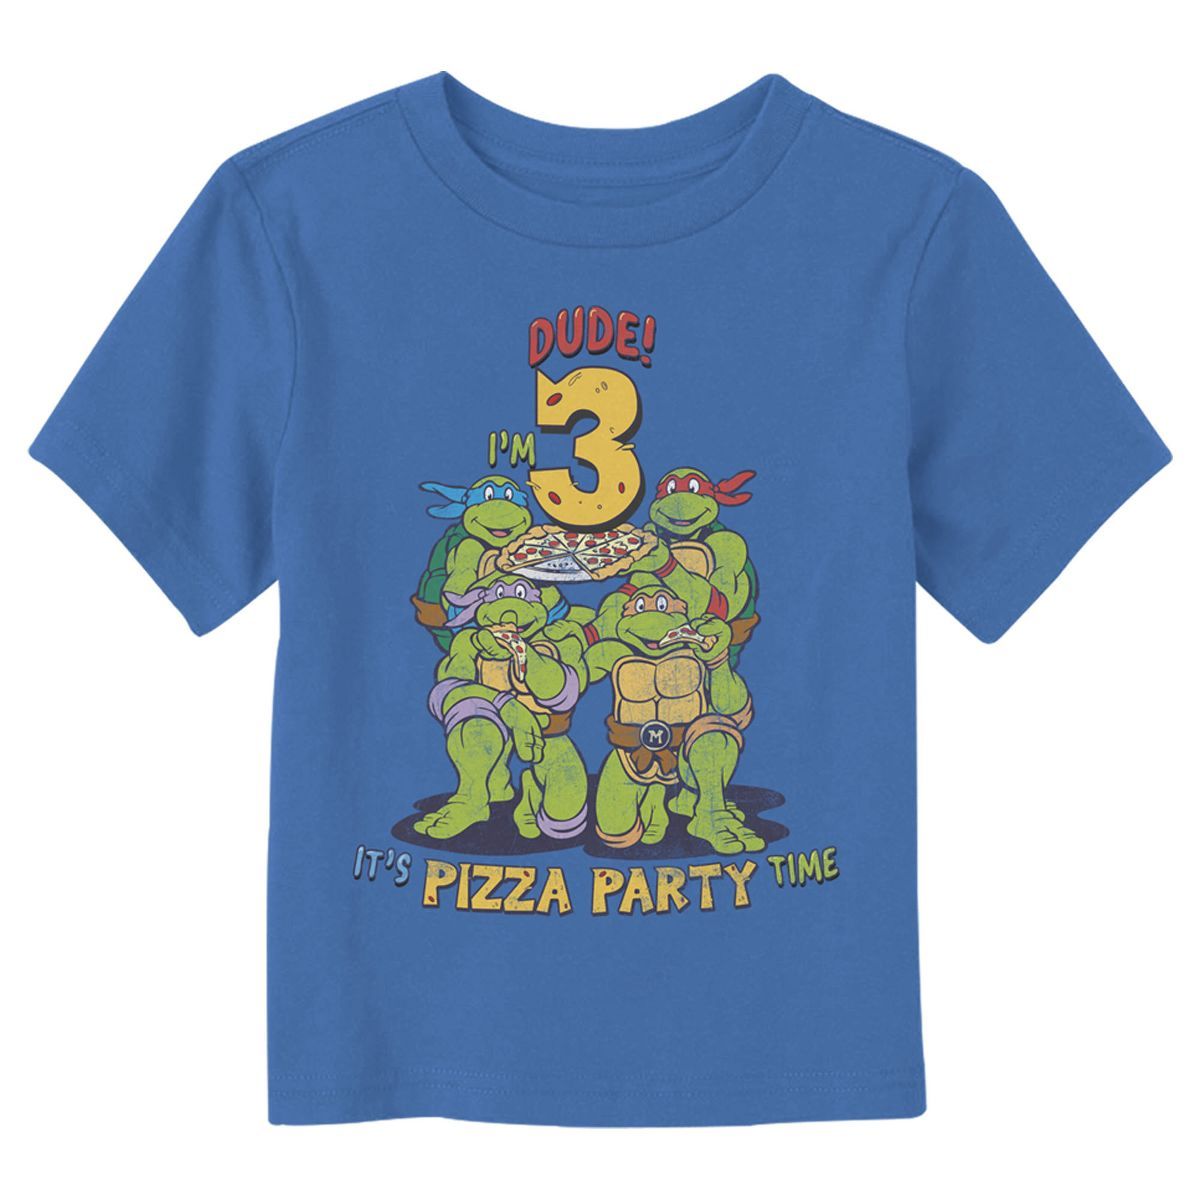 Toddler's Teenage Mutant Ninja Turtles Dude I'm 3 It's Pizza Party Time T-Shirt | Target